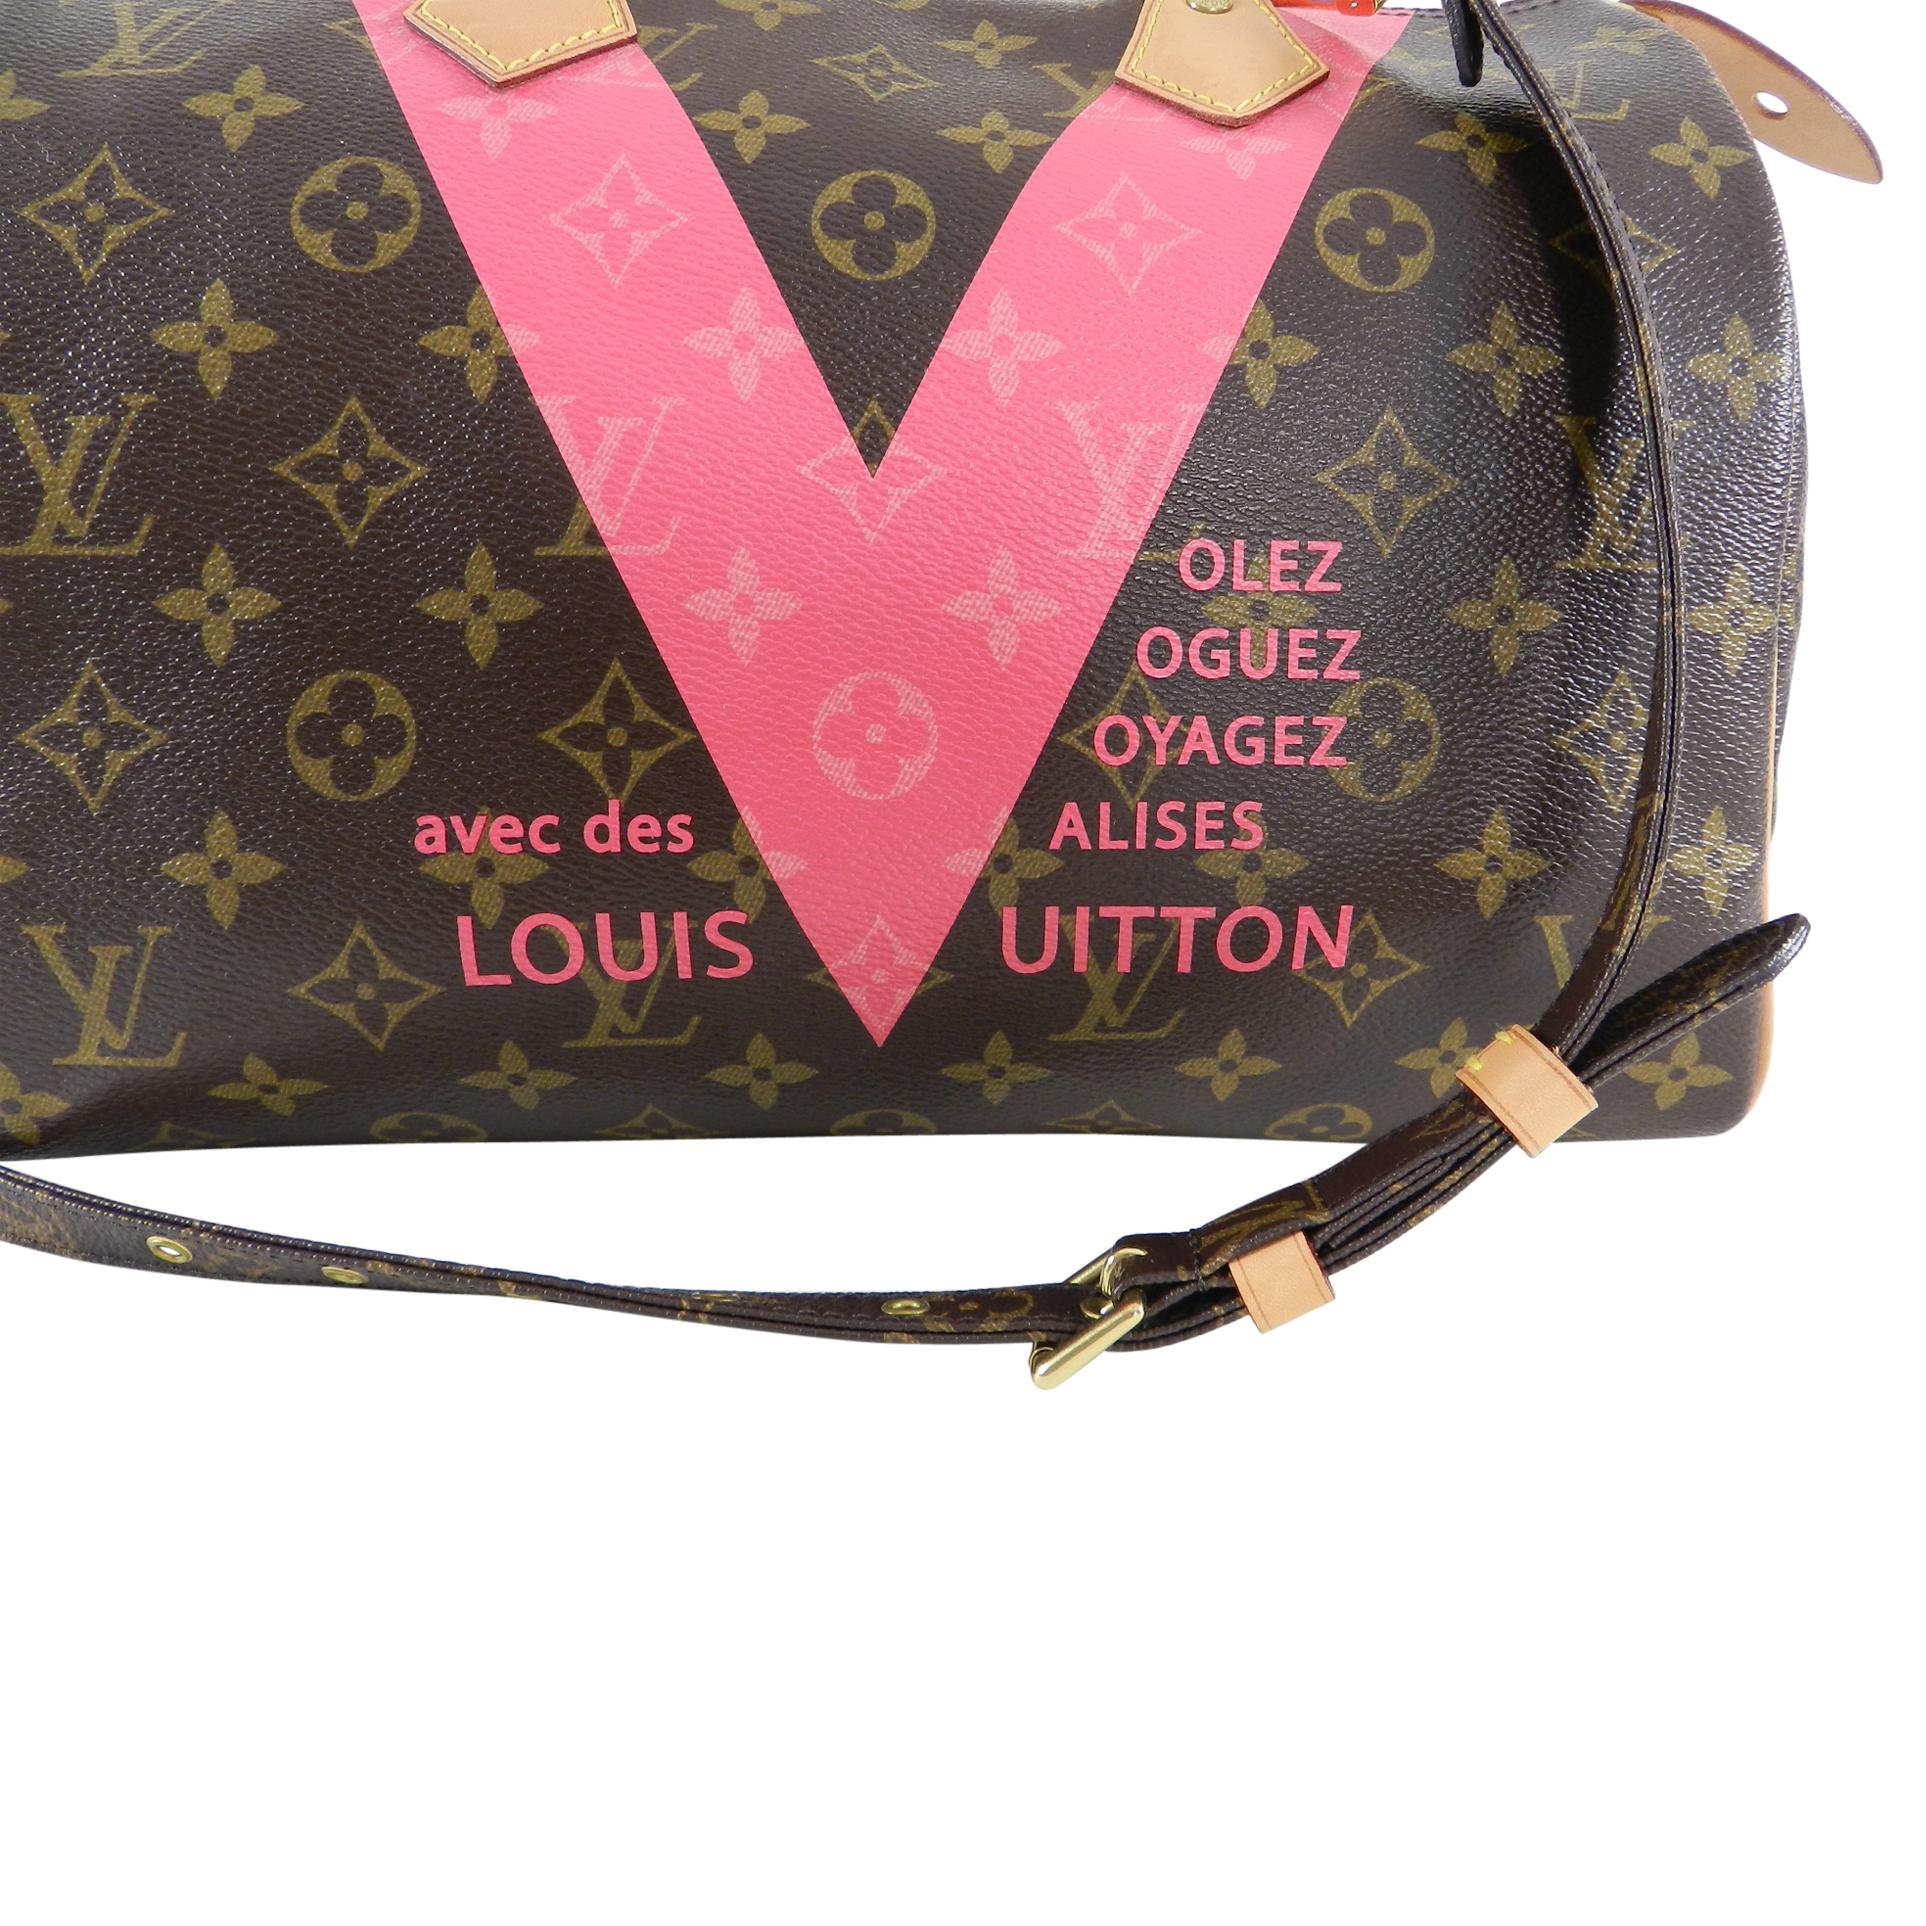 Louis Vuitton Monogram Grenade Speedy 30.  Limited edition bag from the Summer 2015 collection designed by Nicolas Ghesquiere.  Bright hot pink V across front with “volez, voguez, voyagez,” slogan taken from Louis Vuitton’s travel advertisements